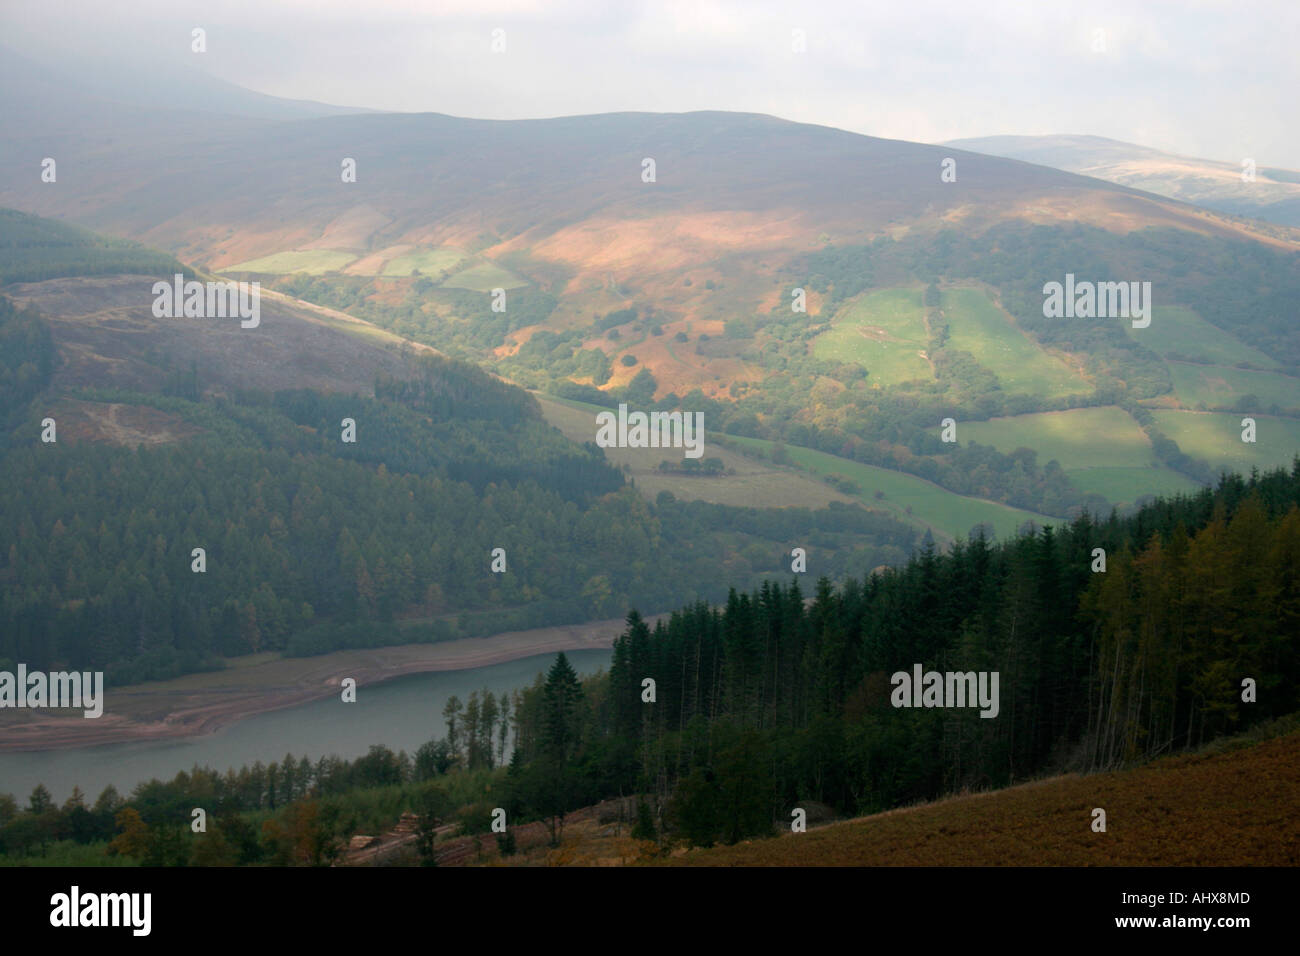 talybont low reservoir brecon beacons mid wales uk gb Stock Photo